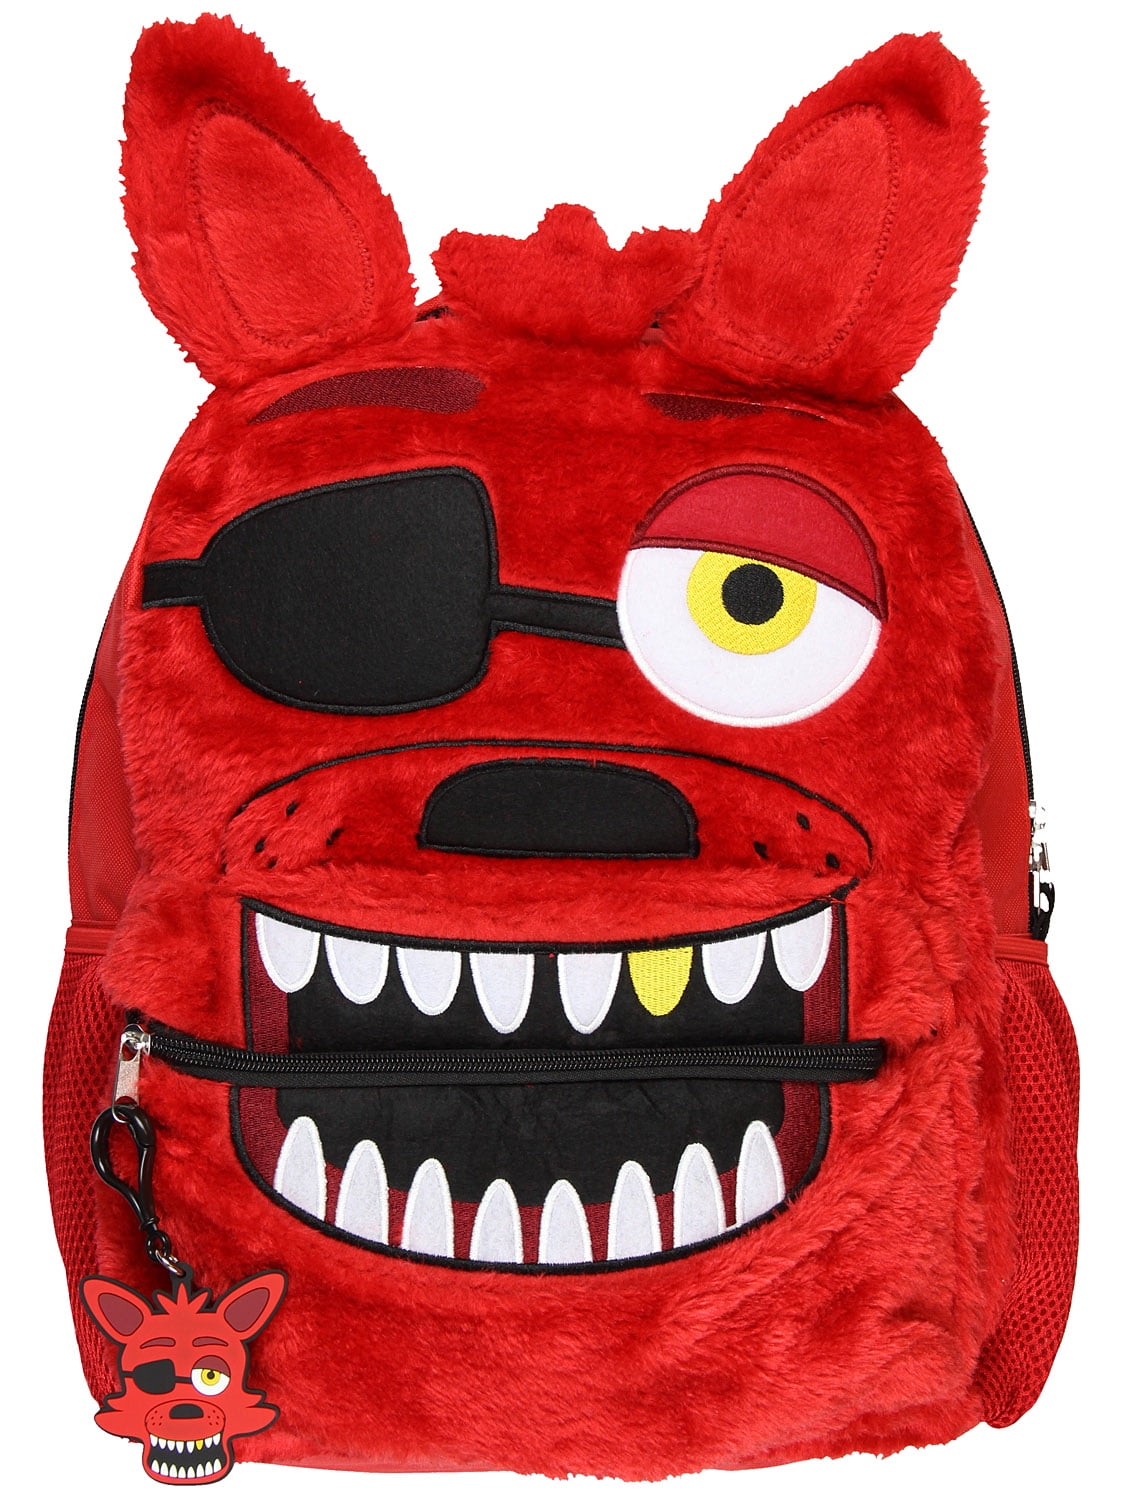 Five Nights at Freddy's Foxy Plush Backpack